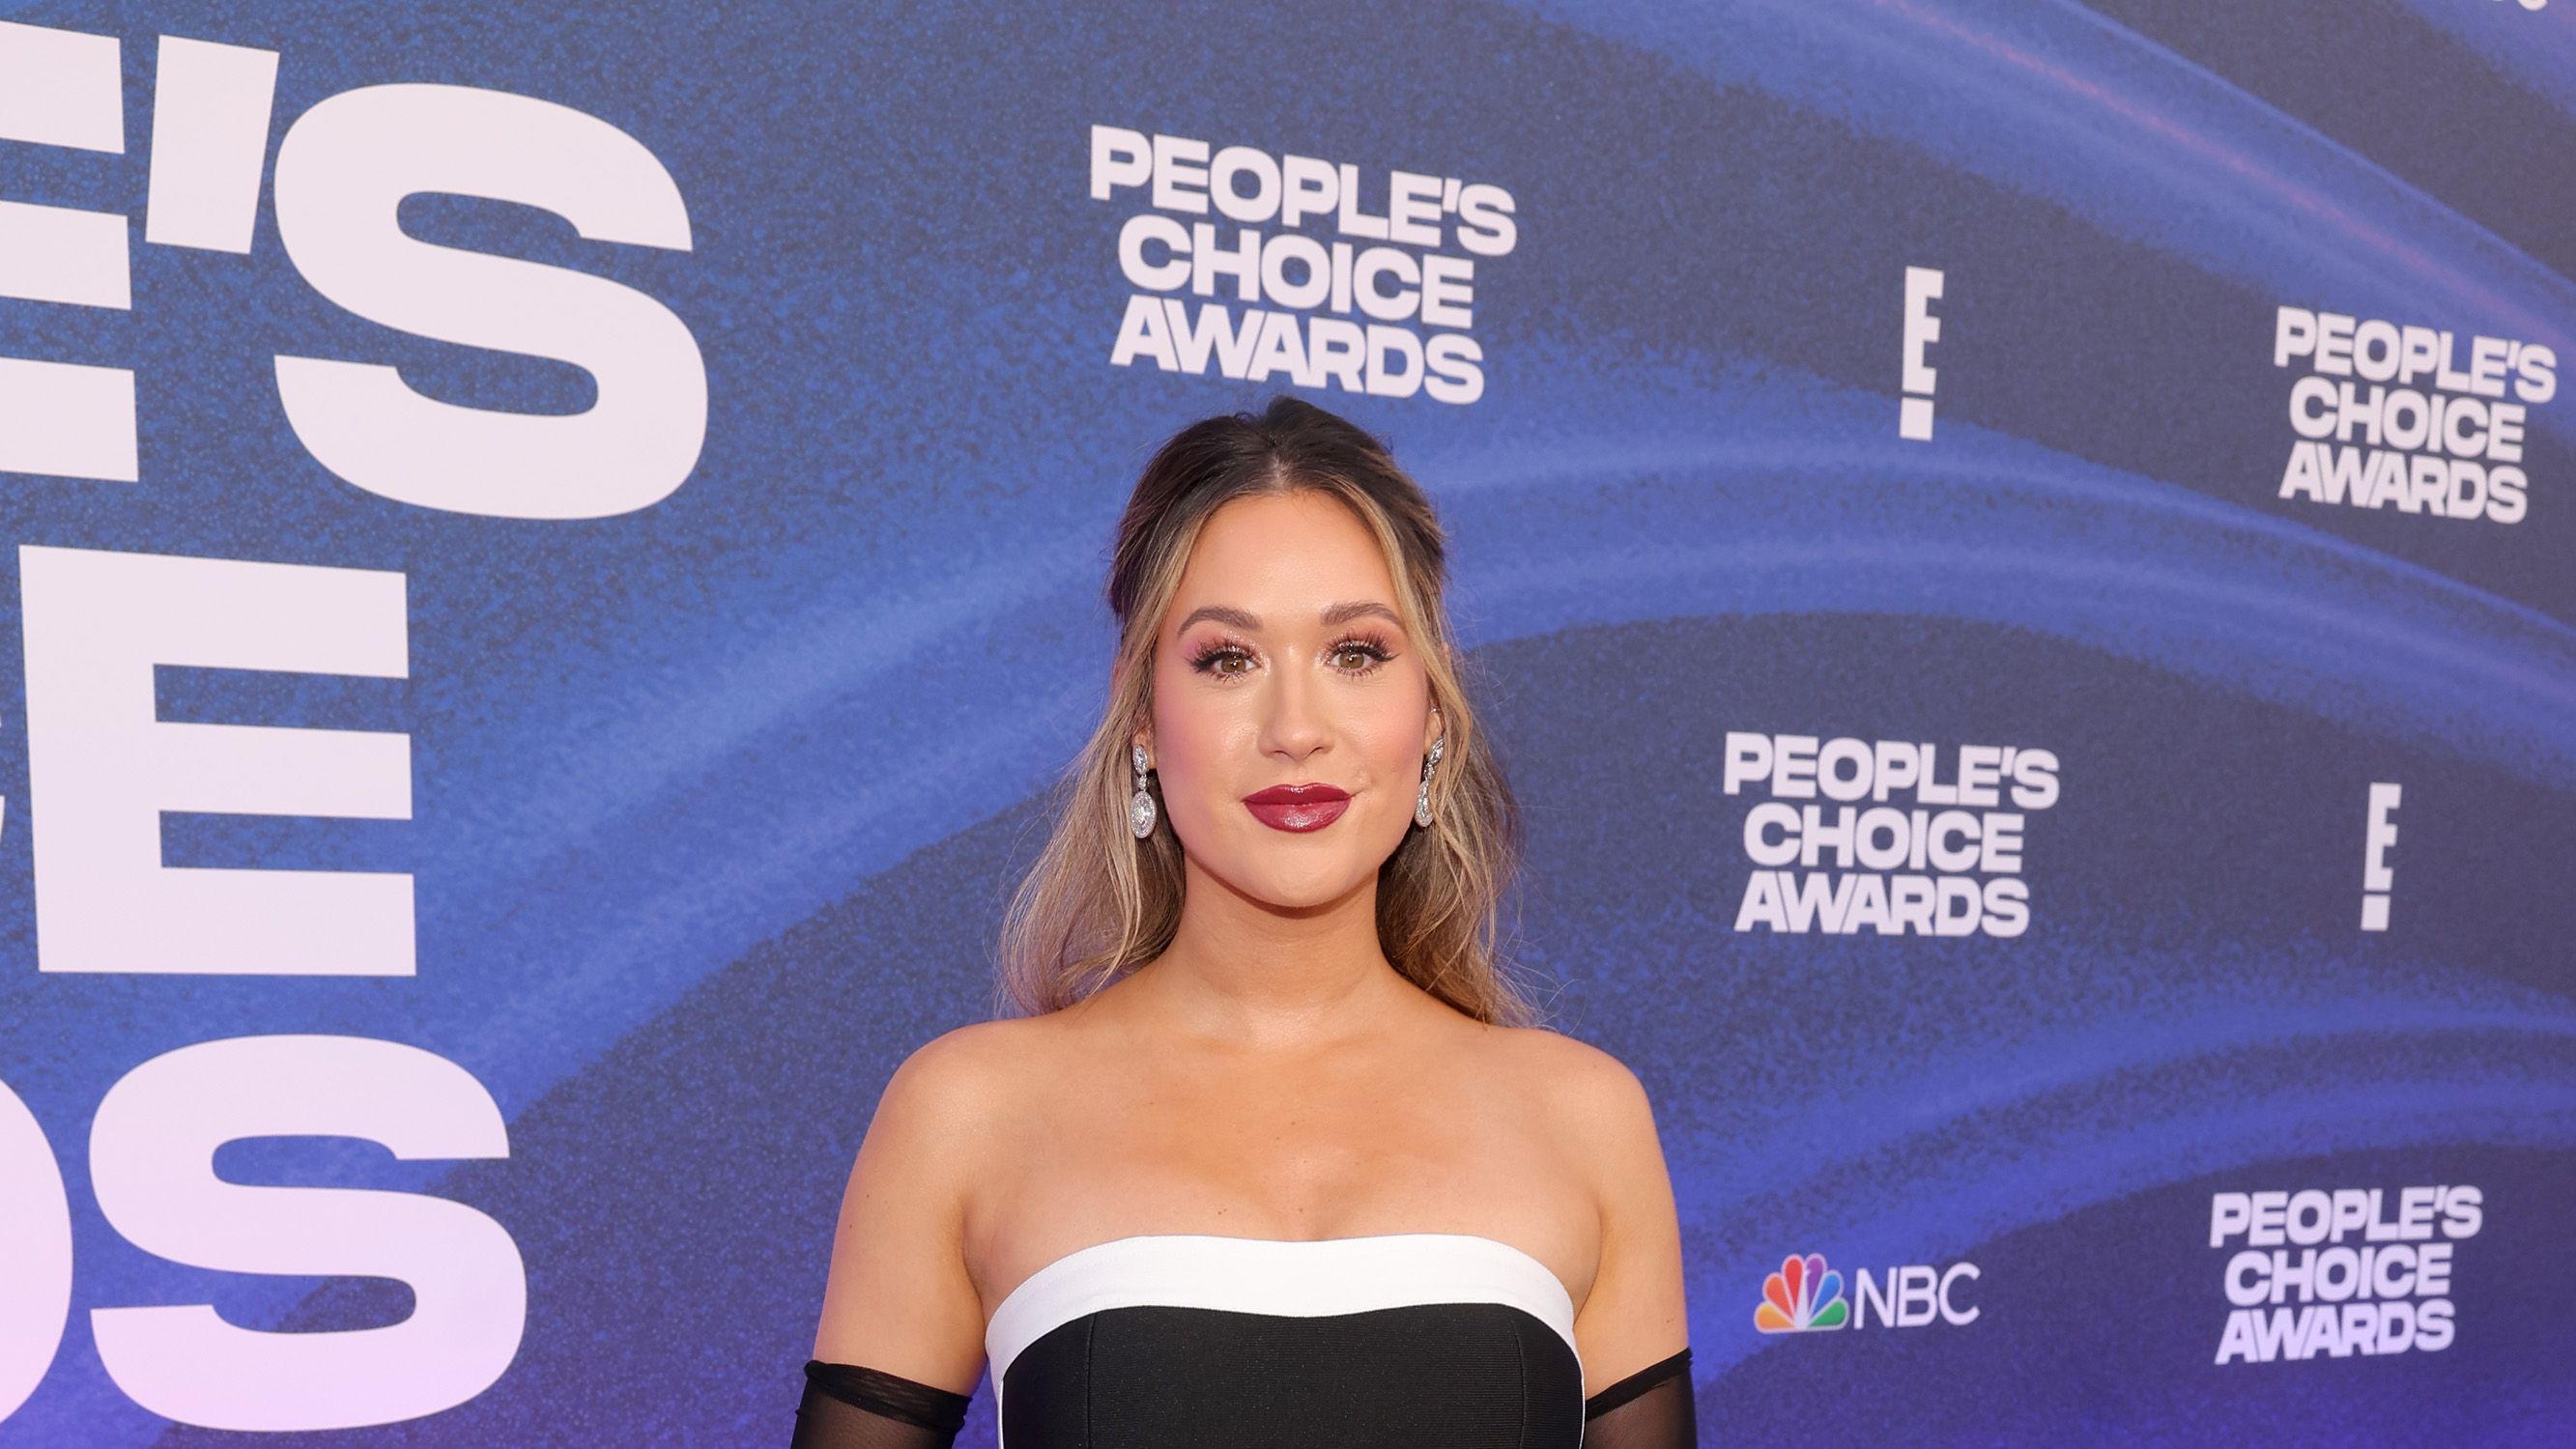 https://hips.hearstapps.com/hmg-prod/images/pictured-rachel-recchia-arrives-to-the-2022-peoples-choice-news-photo-1678383942.jpg?crop=1xw:0.37491xh;center,top